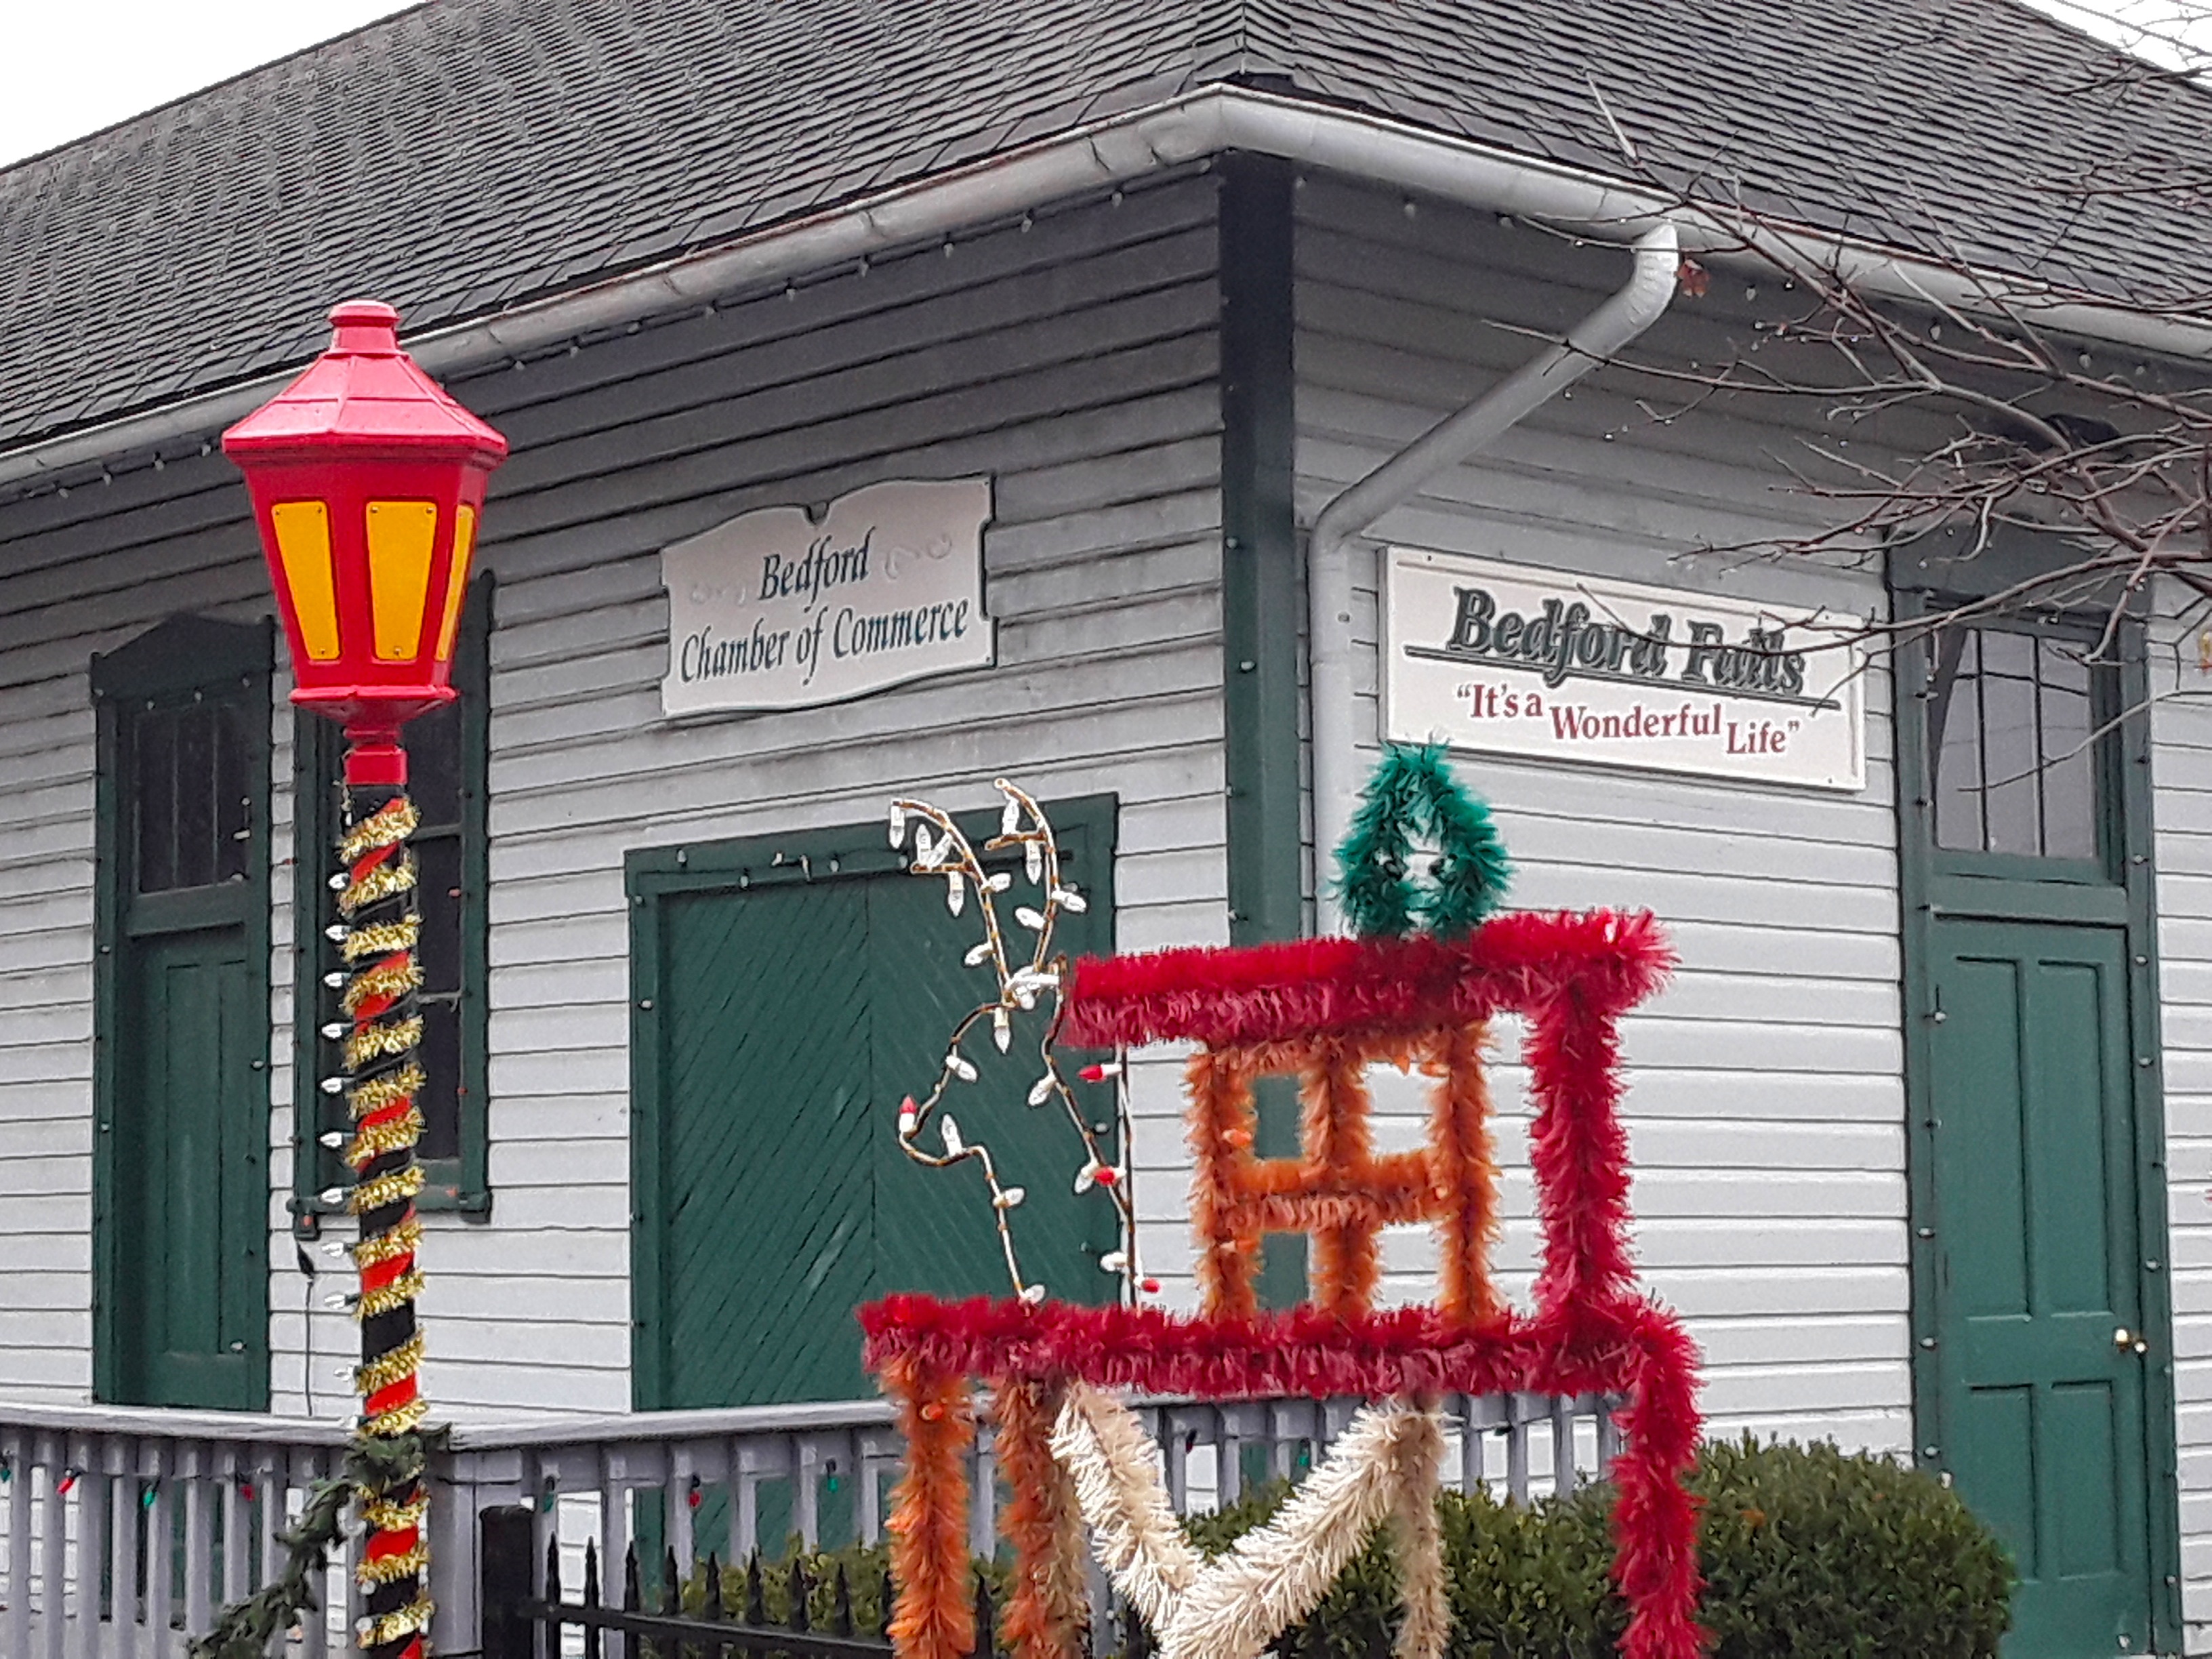 Annual “Christmas in Bedford Falls” set for December 8